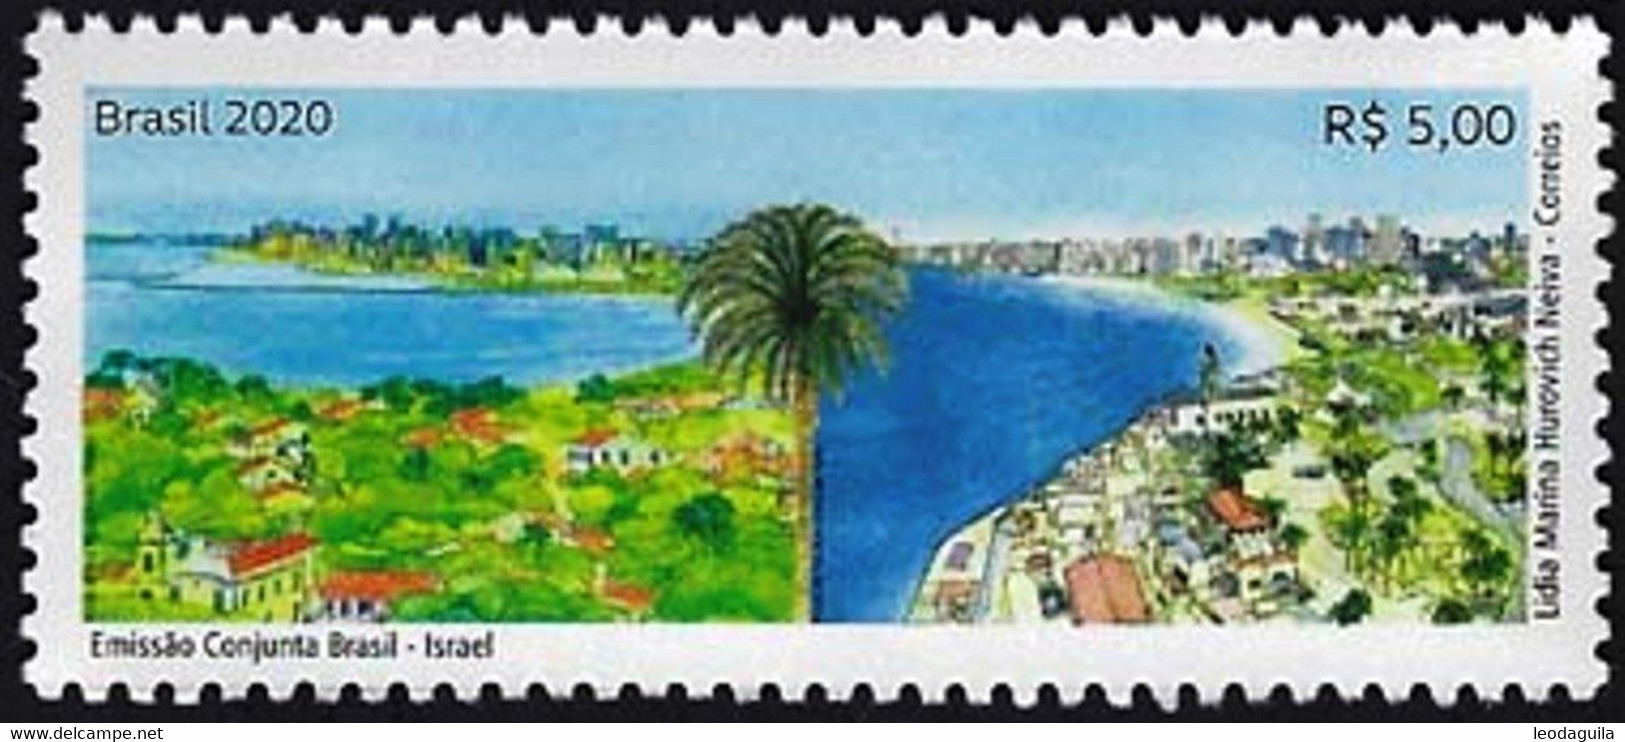 BRAZIL 2020  - ISRAEL And BRAZIL LANDSCAPE - JOINT ISSUE  - MNH - Unused Stamps